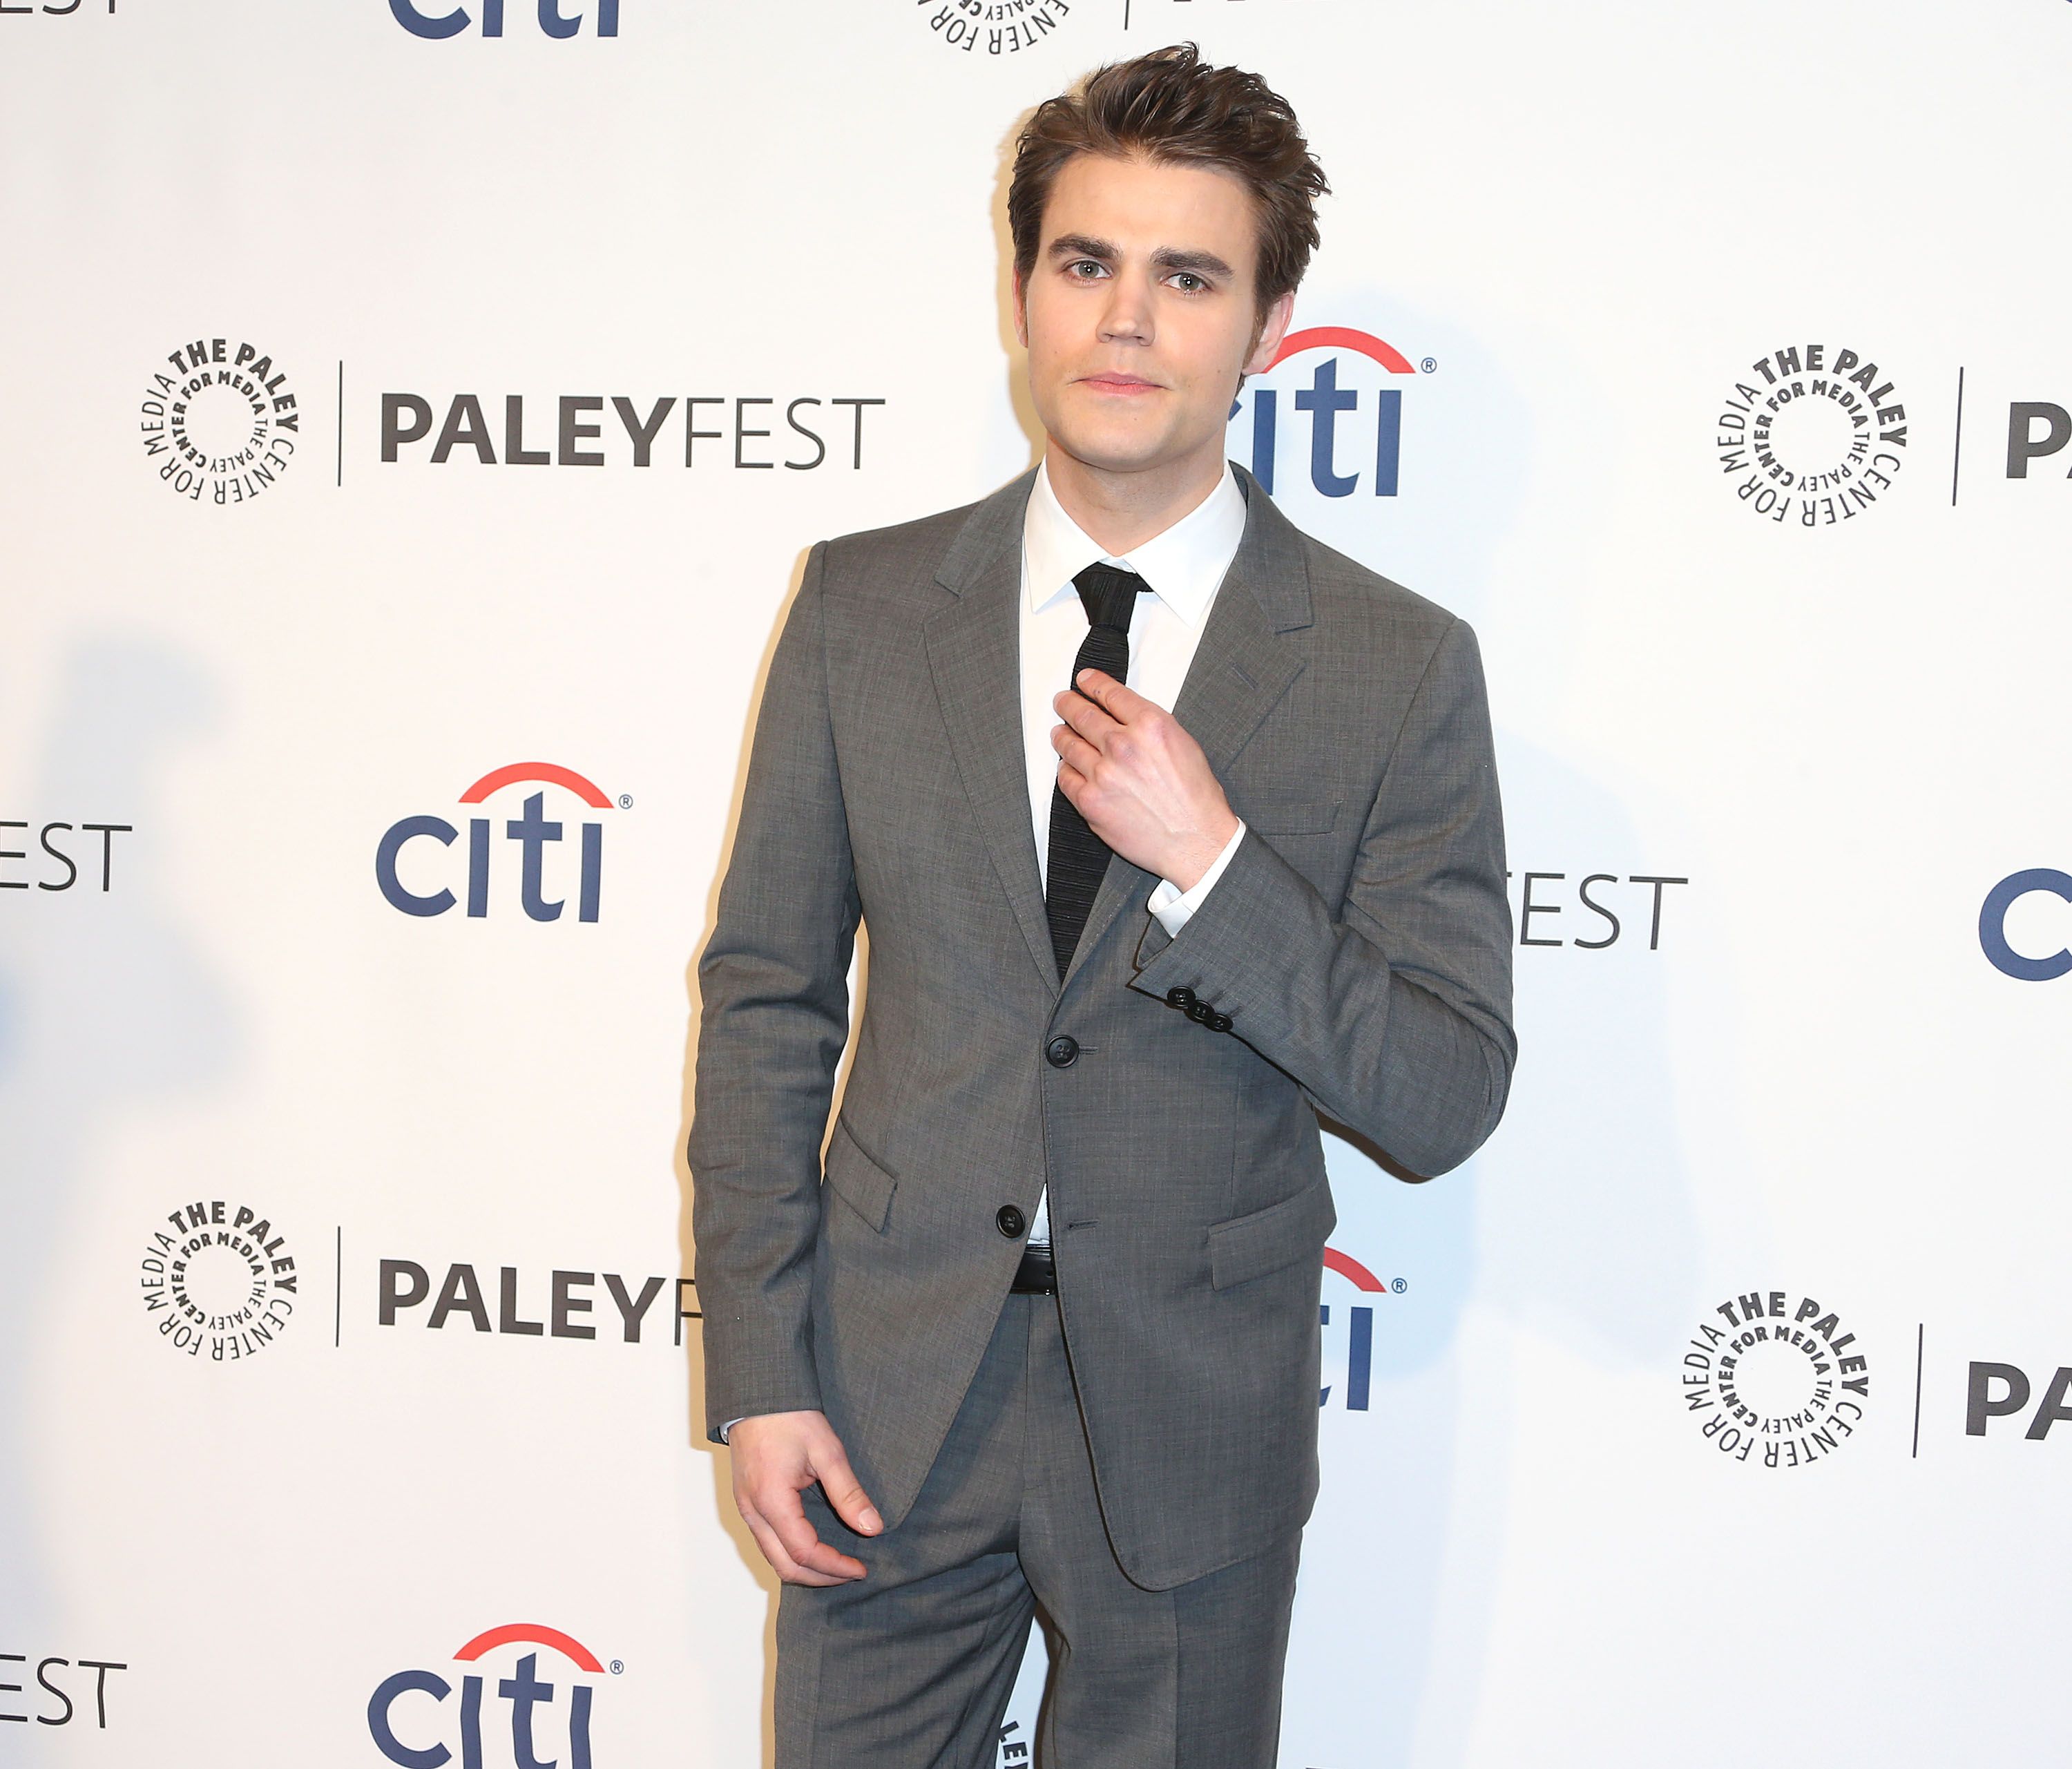 Paul Wesley during The Paley Center for Media's PaleyFest 2014 Honoring "The Vampire Diaries" and "The Originals" at the Dolby Theatre on March 22, 2014, in Hollywood, California. | Source: Getty Images